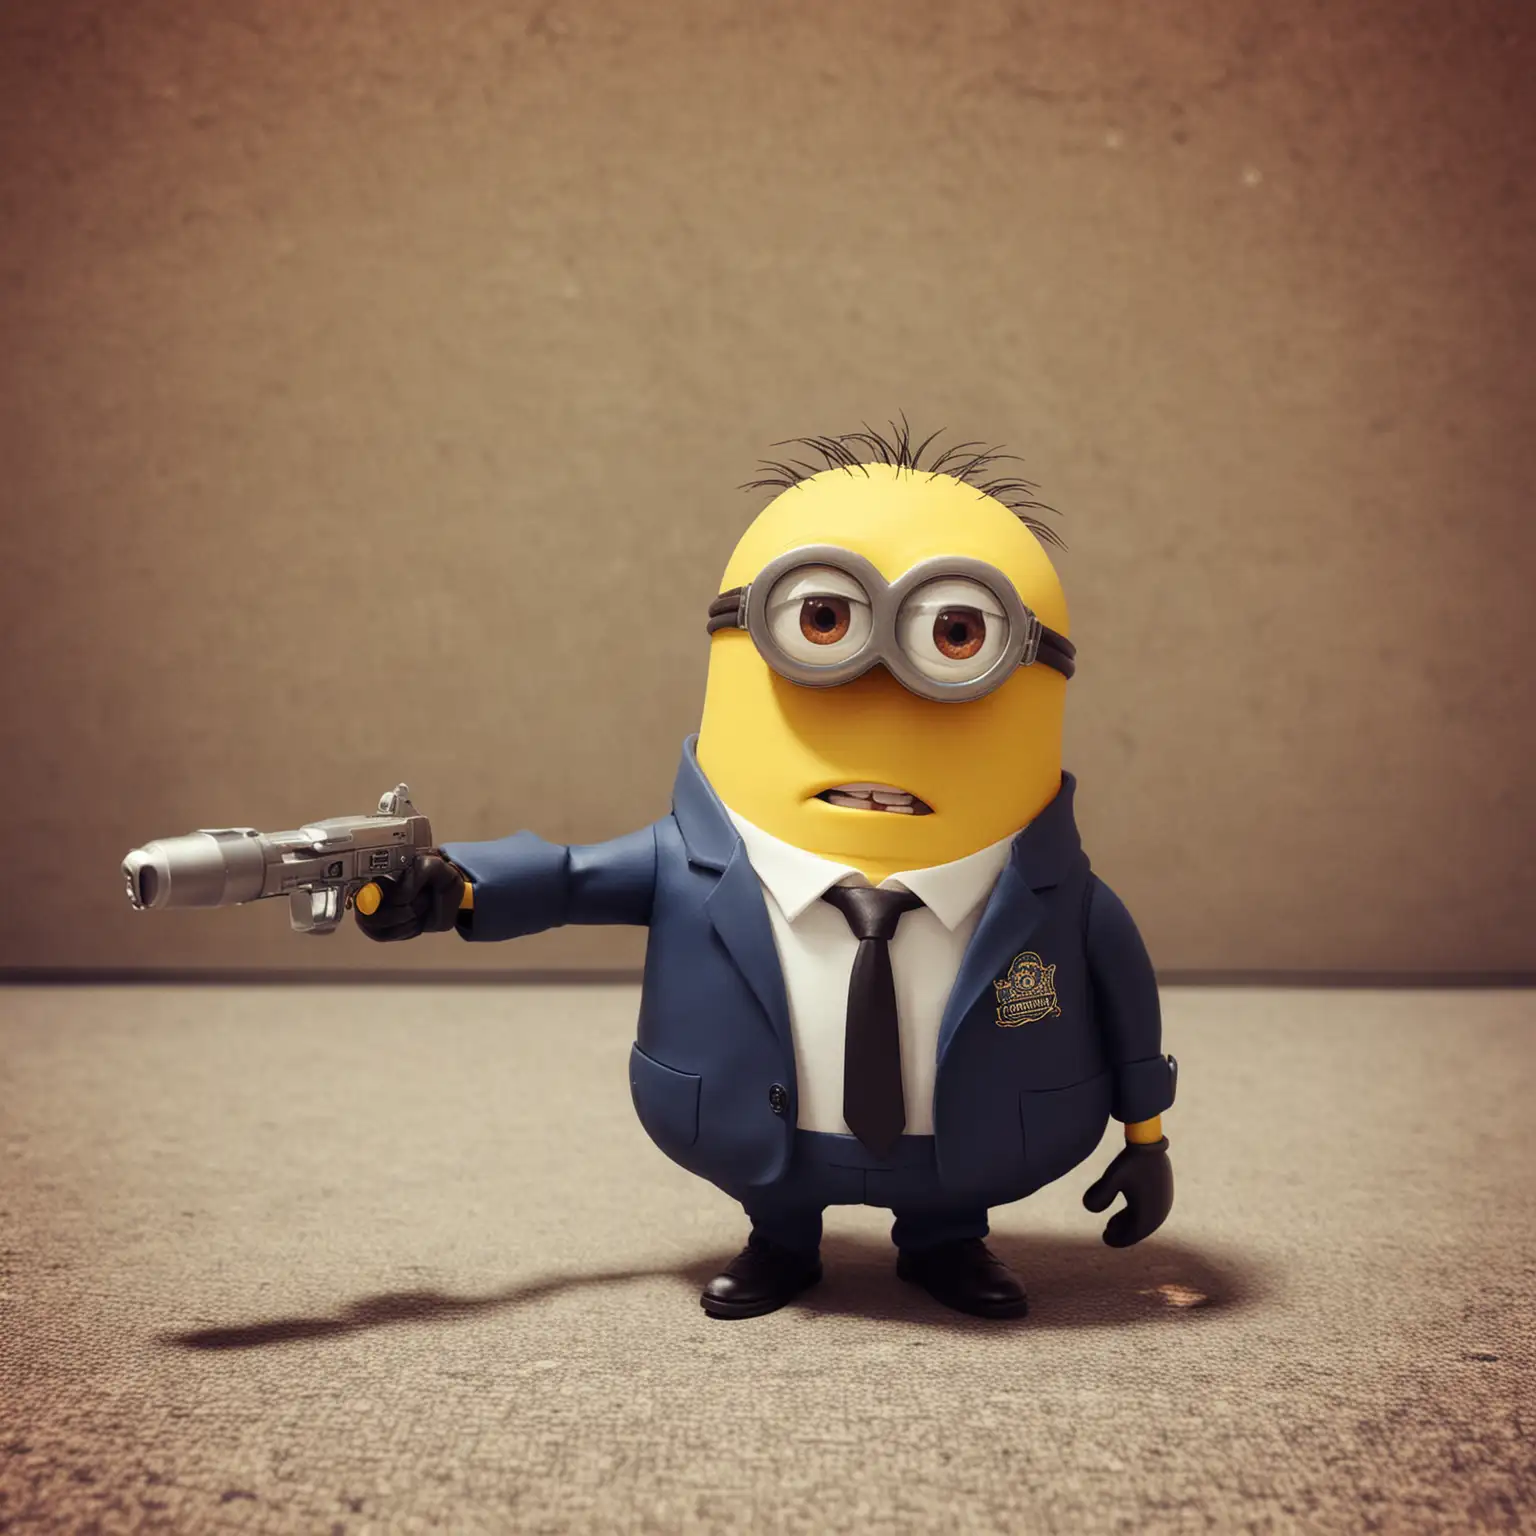 Mischievous Minion Kevin Engages in a Skirmish with FBI Agent